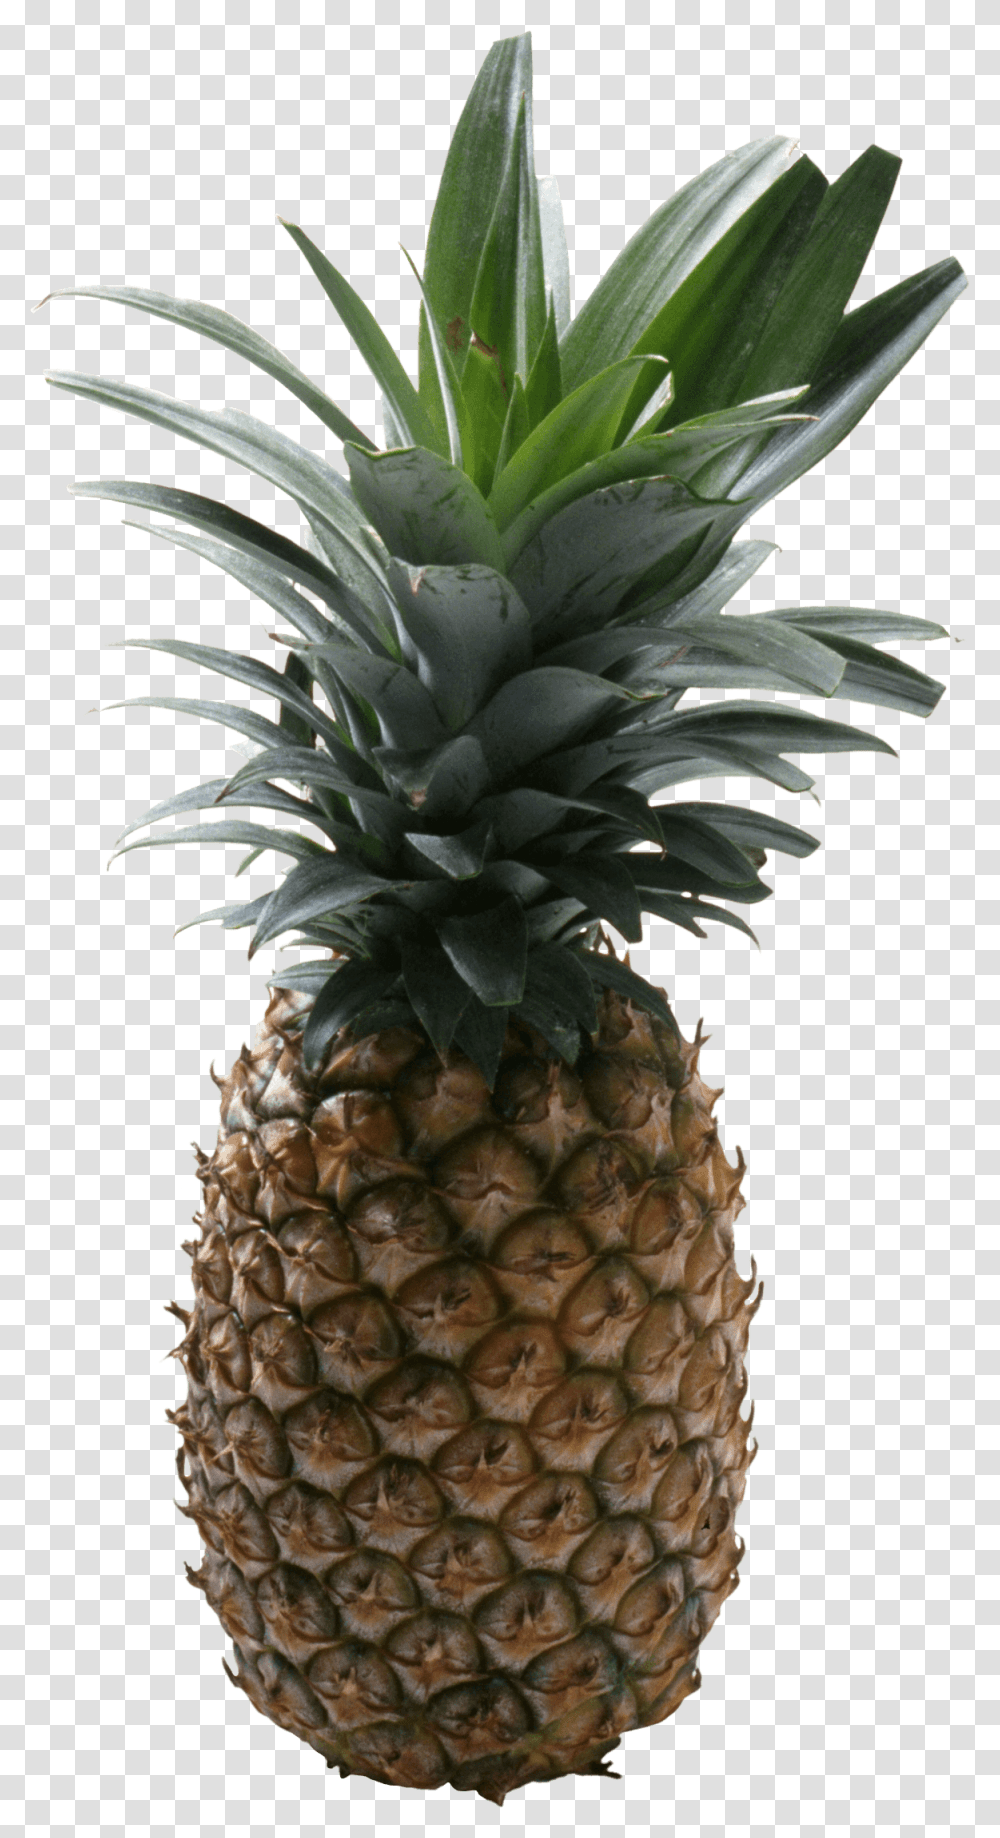 Pineapple No Background Pineapple With No Background, Fruit, Plant Transparent Png